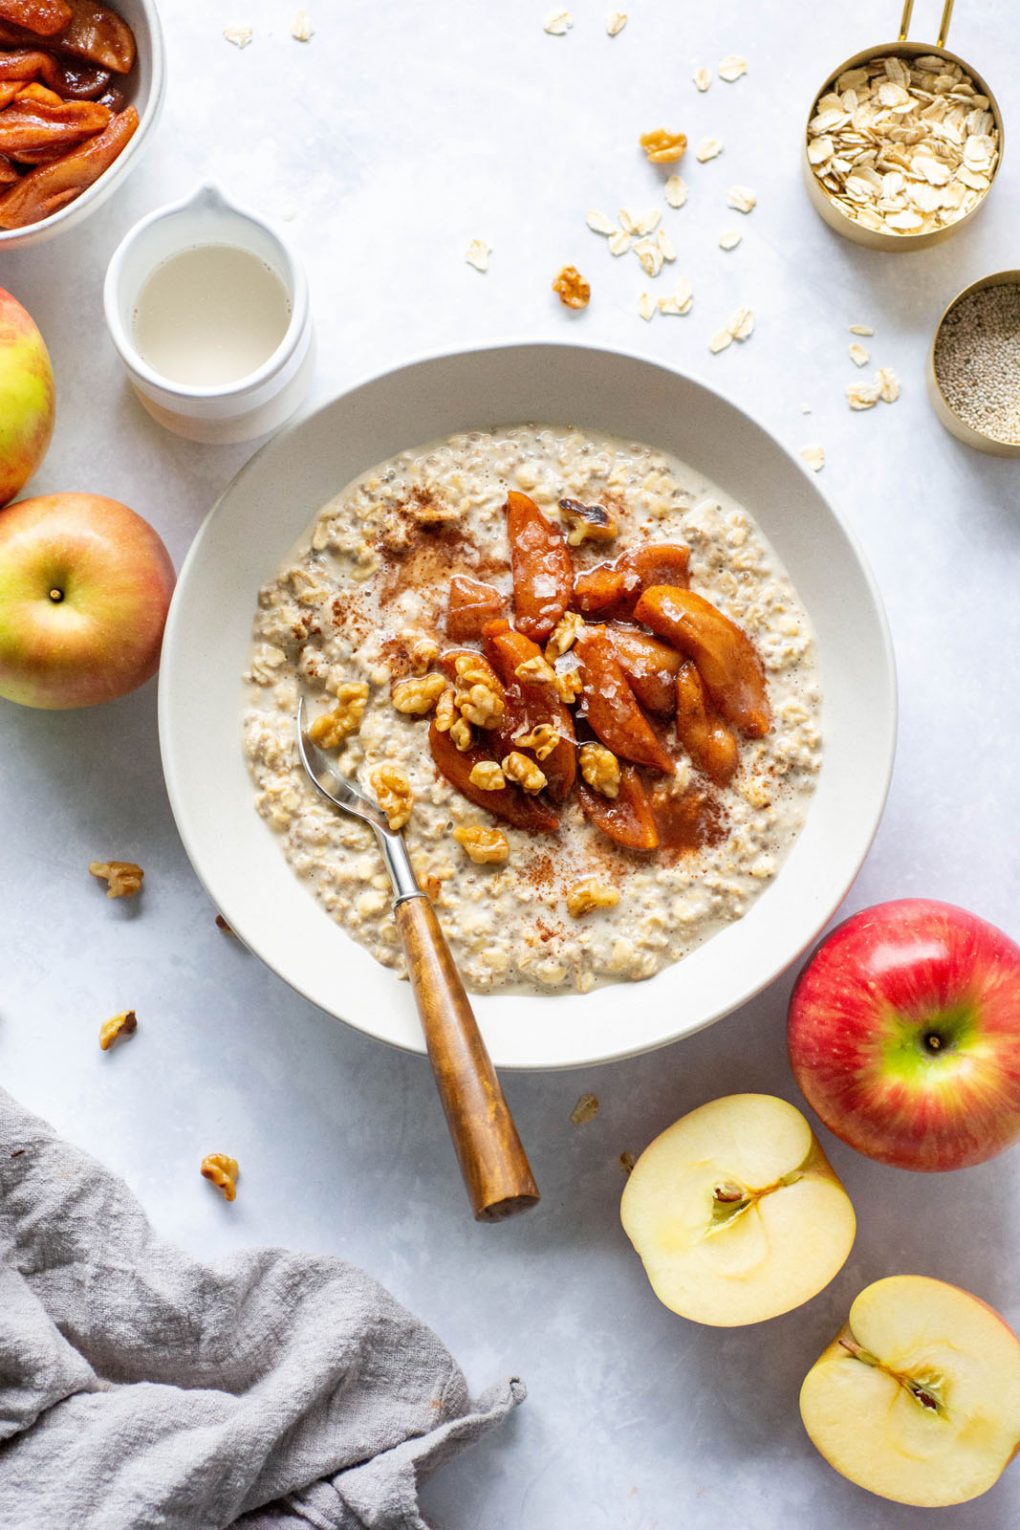 Large white bowl of salted caramel apple overnight oats topped with a big scoop of baked cinnamon apples, walnuts, and flaky sea salt. Bowl is on a light background surounded by cut apples, and bits of walnuts.